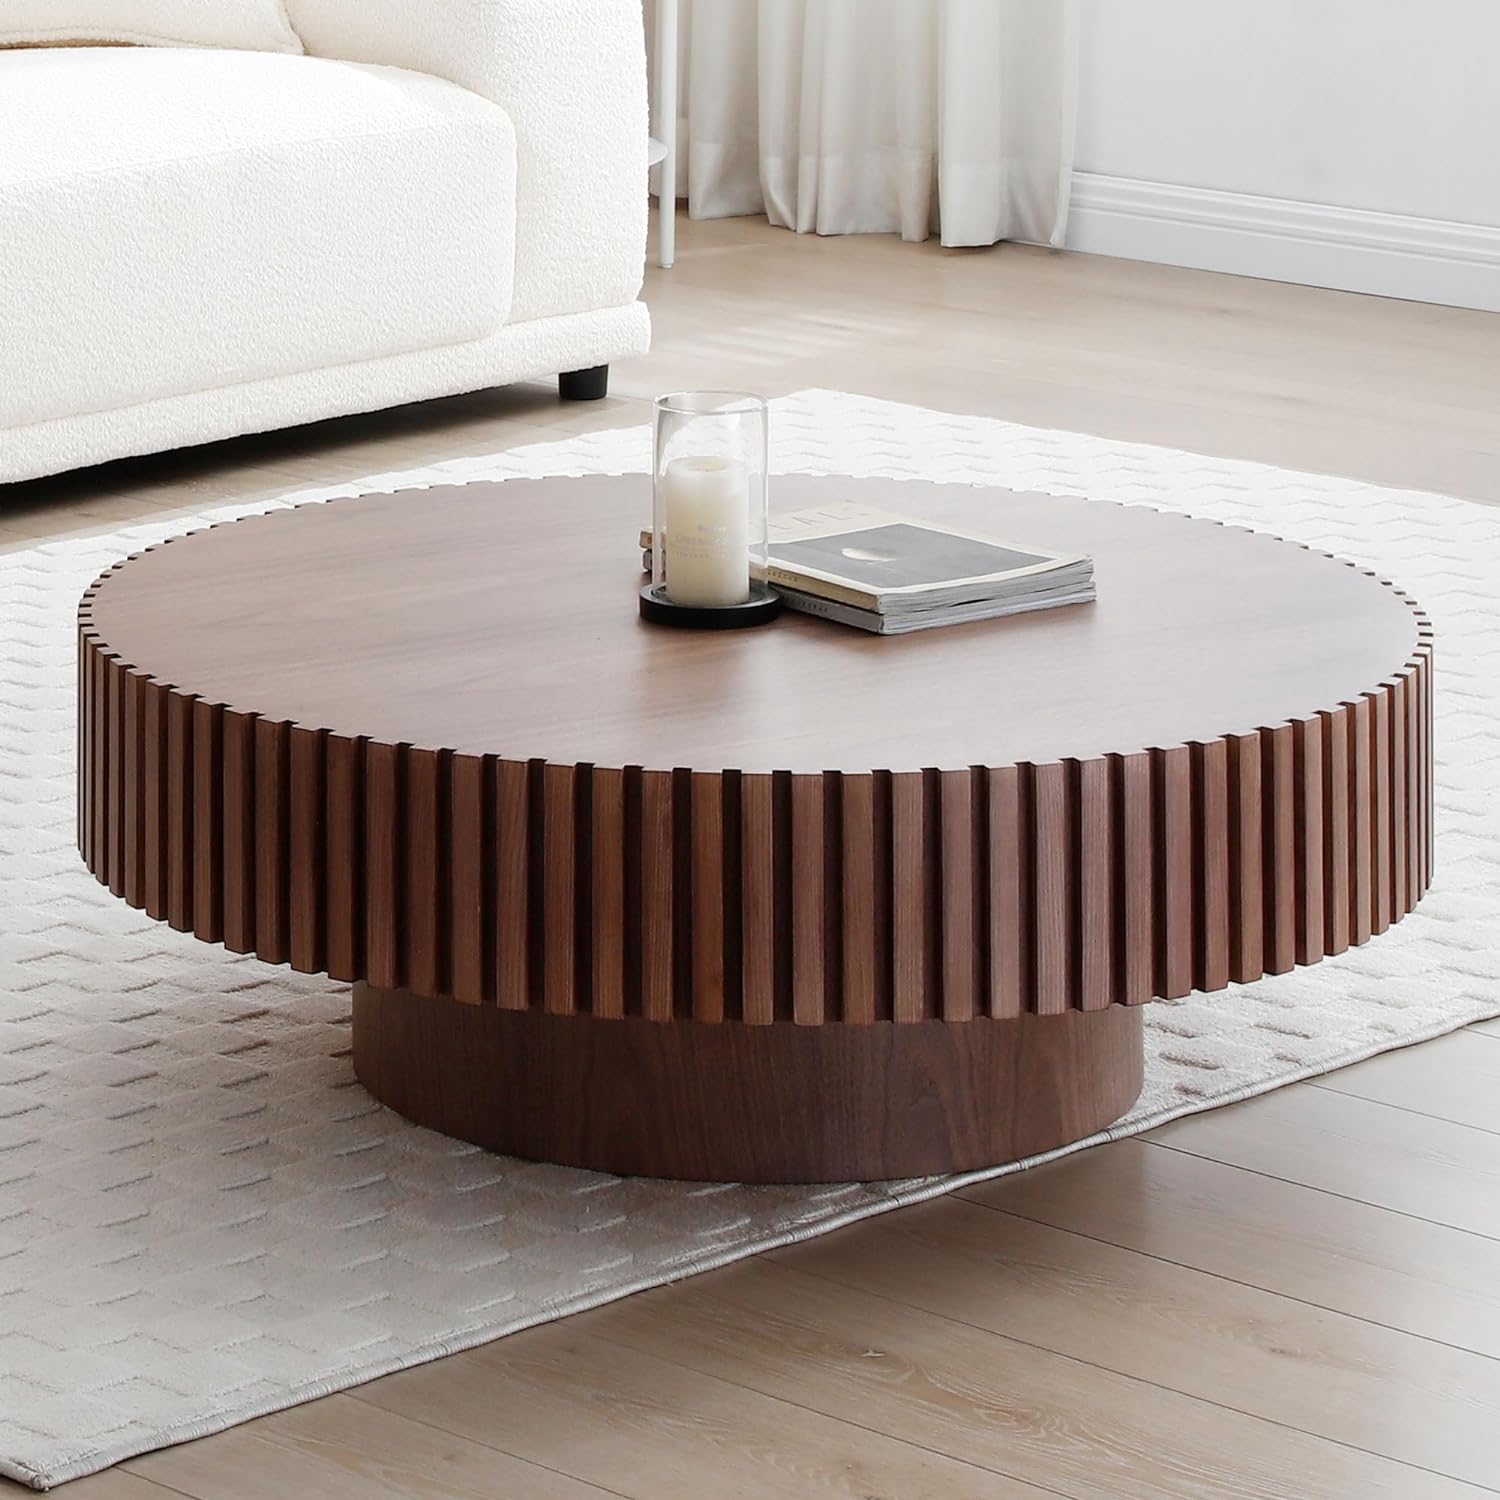 WILLIAMSPACE 31.49 Walnut Round Coffee Table, Modern Luxury Wood Circle Drum Center Table for Living Room, Accent Side Table End Table for Apartment, 31.49'' x 13.77''H (Walnut)